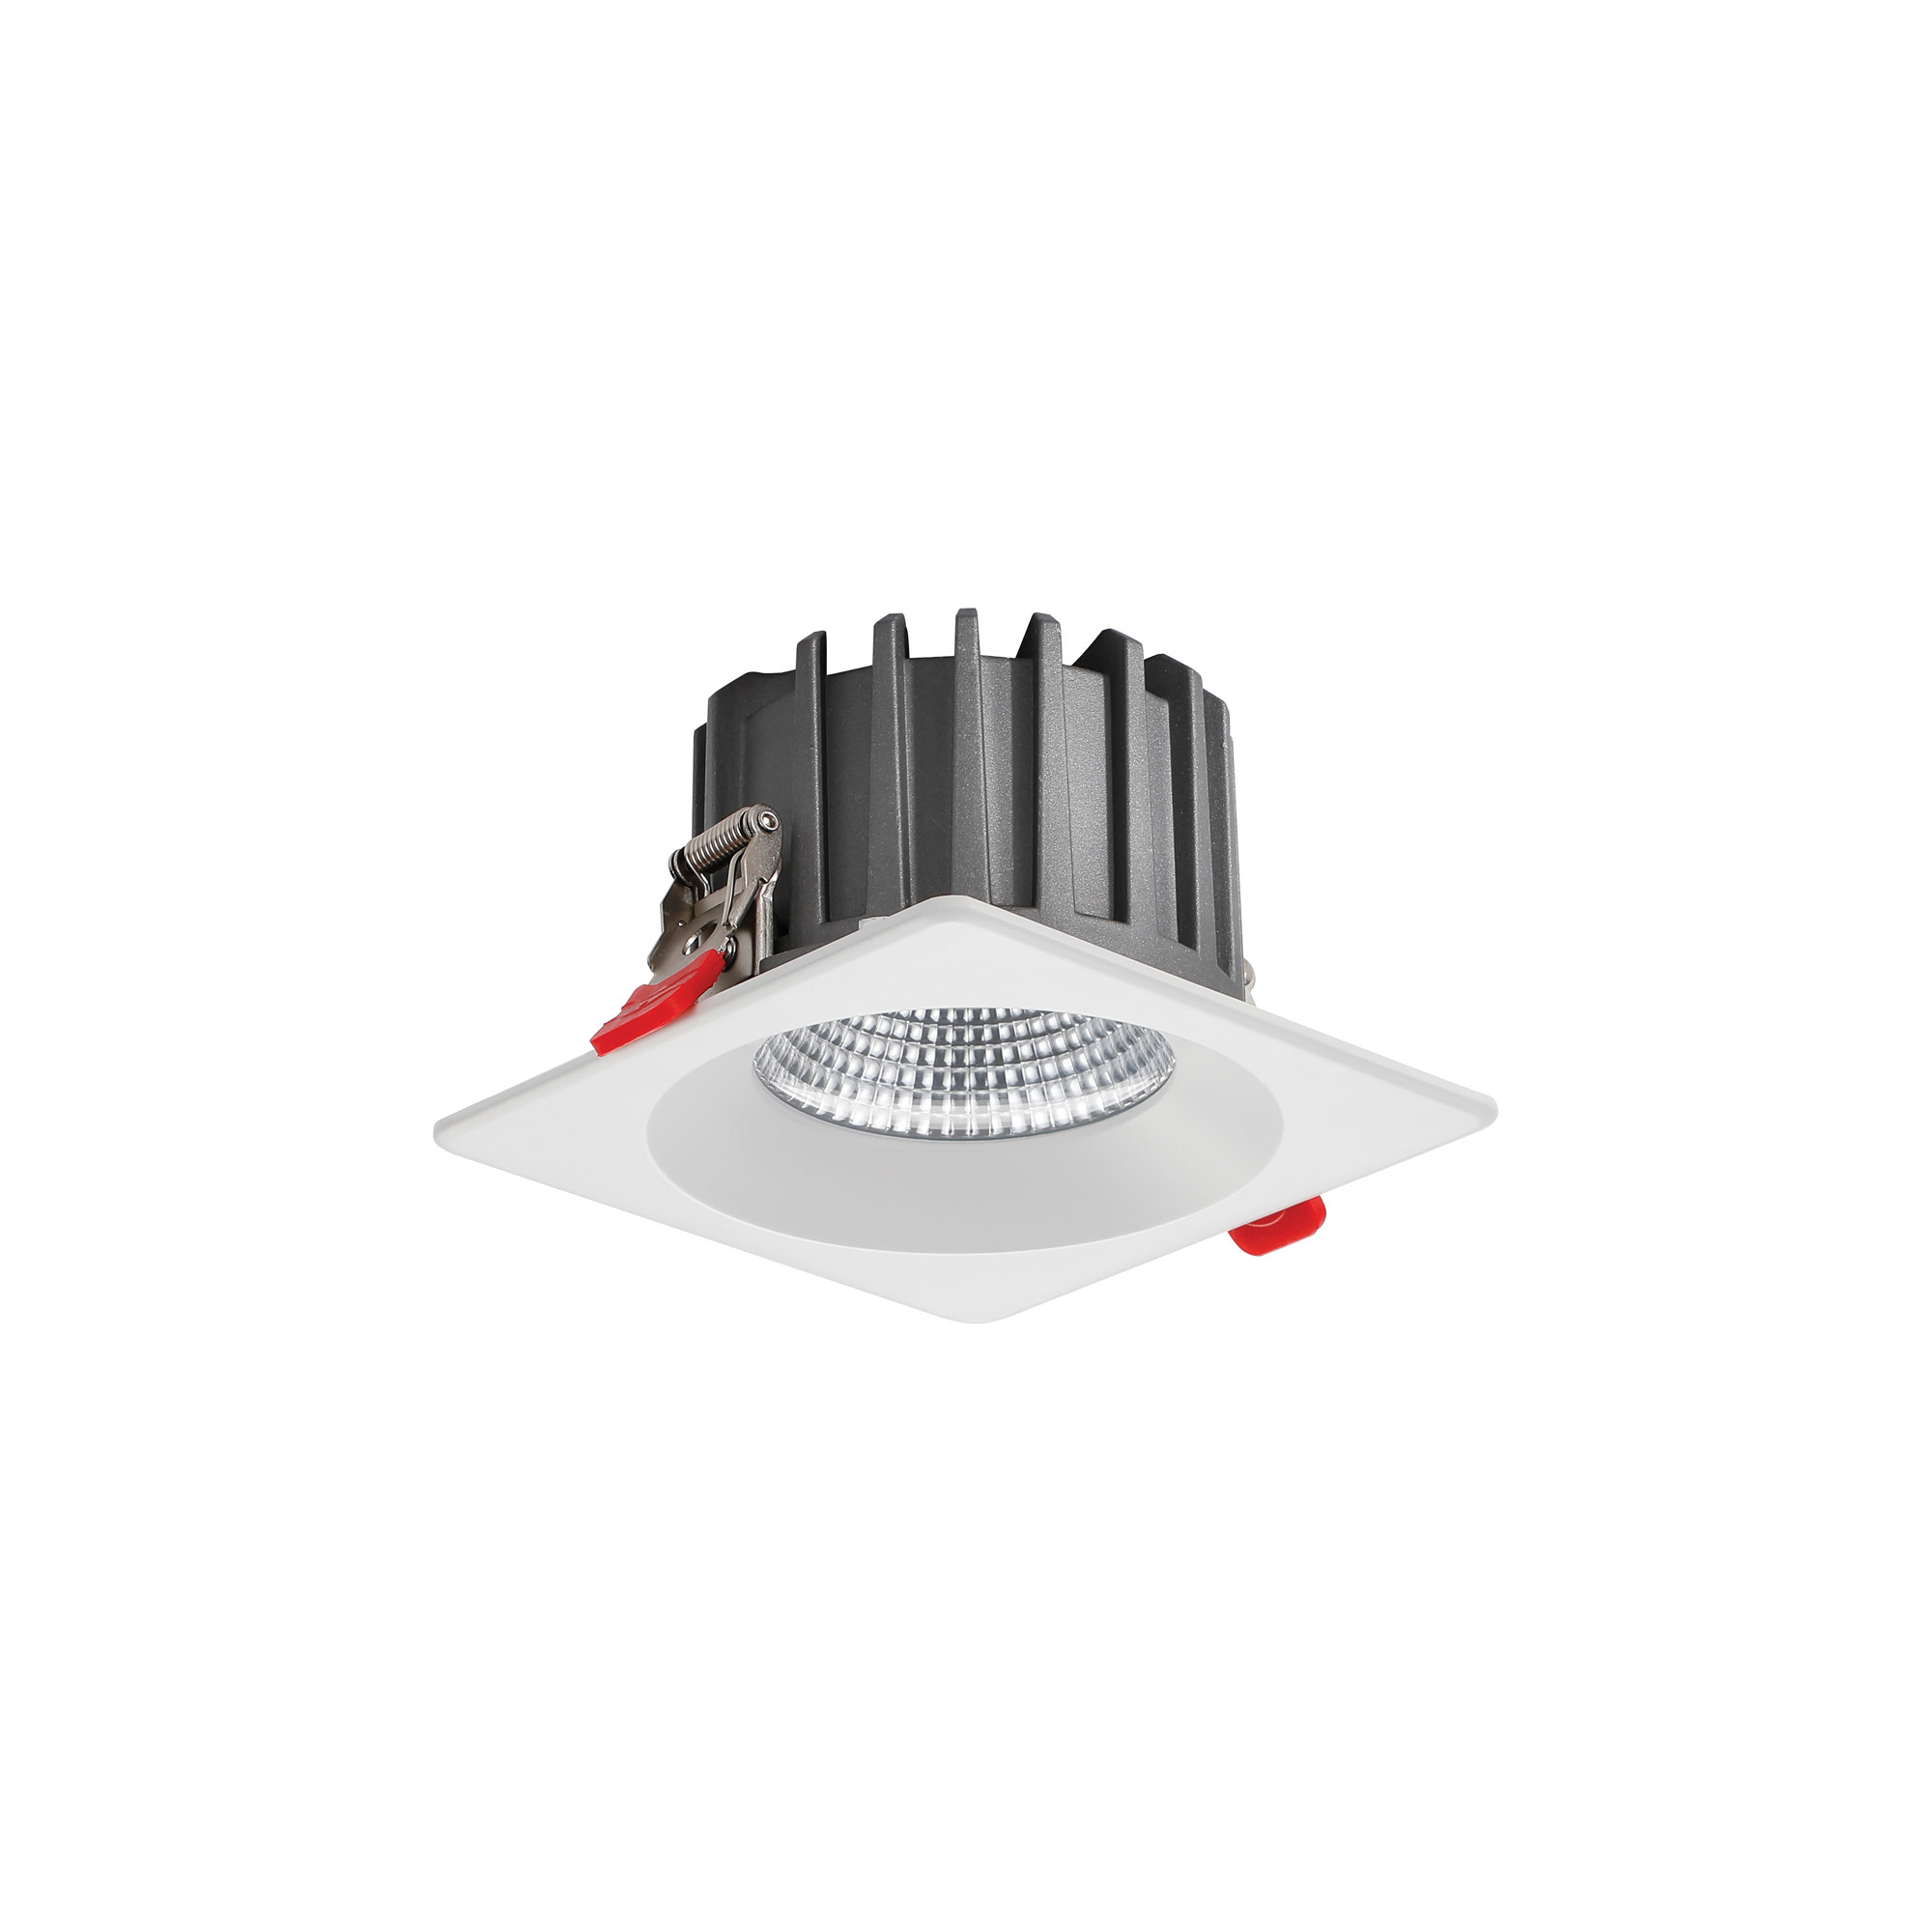 DL200072  Bionic 15, 15W, 350mA, White Deep Square Recessed Downlight, 1200lm ,Cut Out 120mm, 40° , 5000K, IP44, DRIVER INC., 5yrs Warranty.